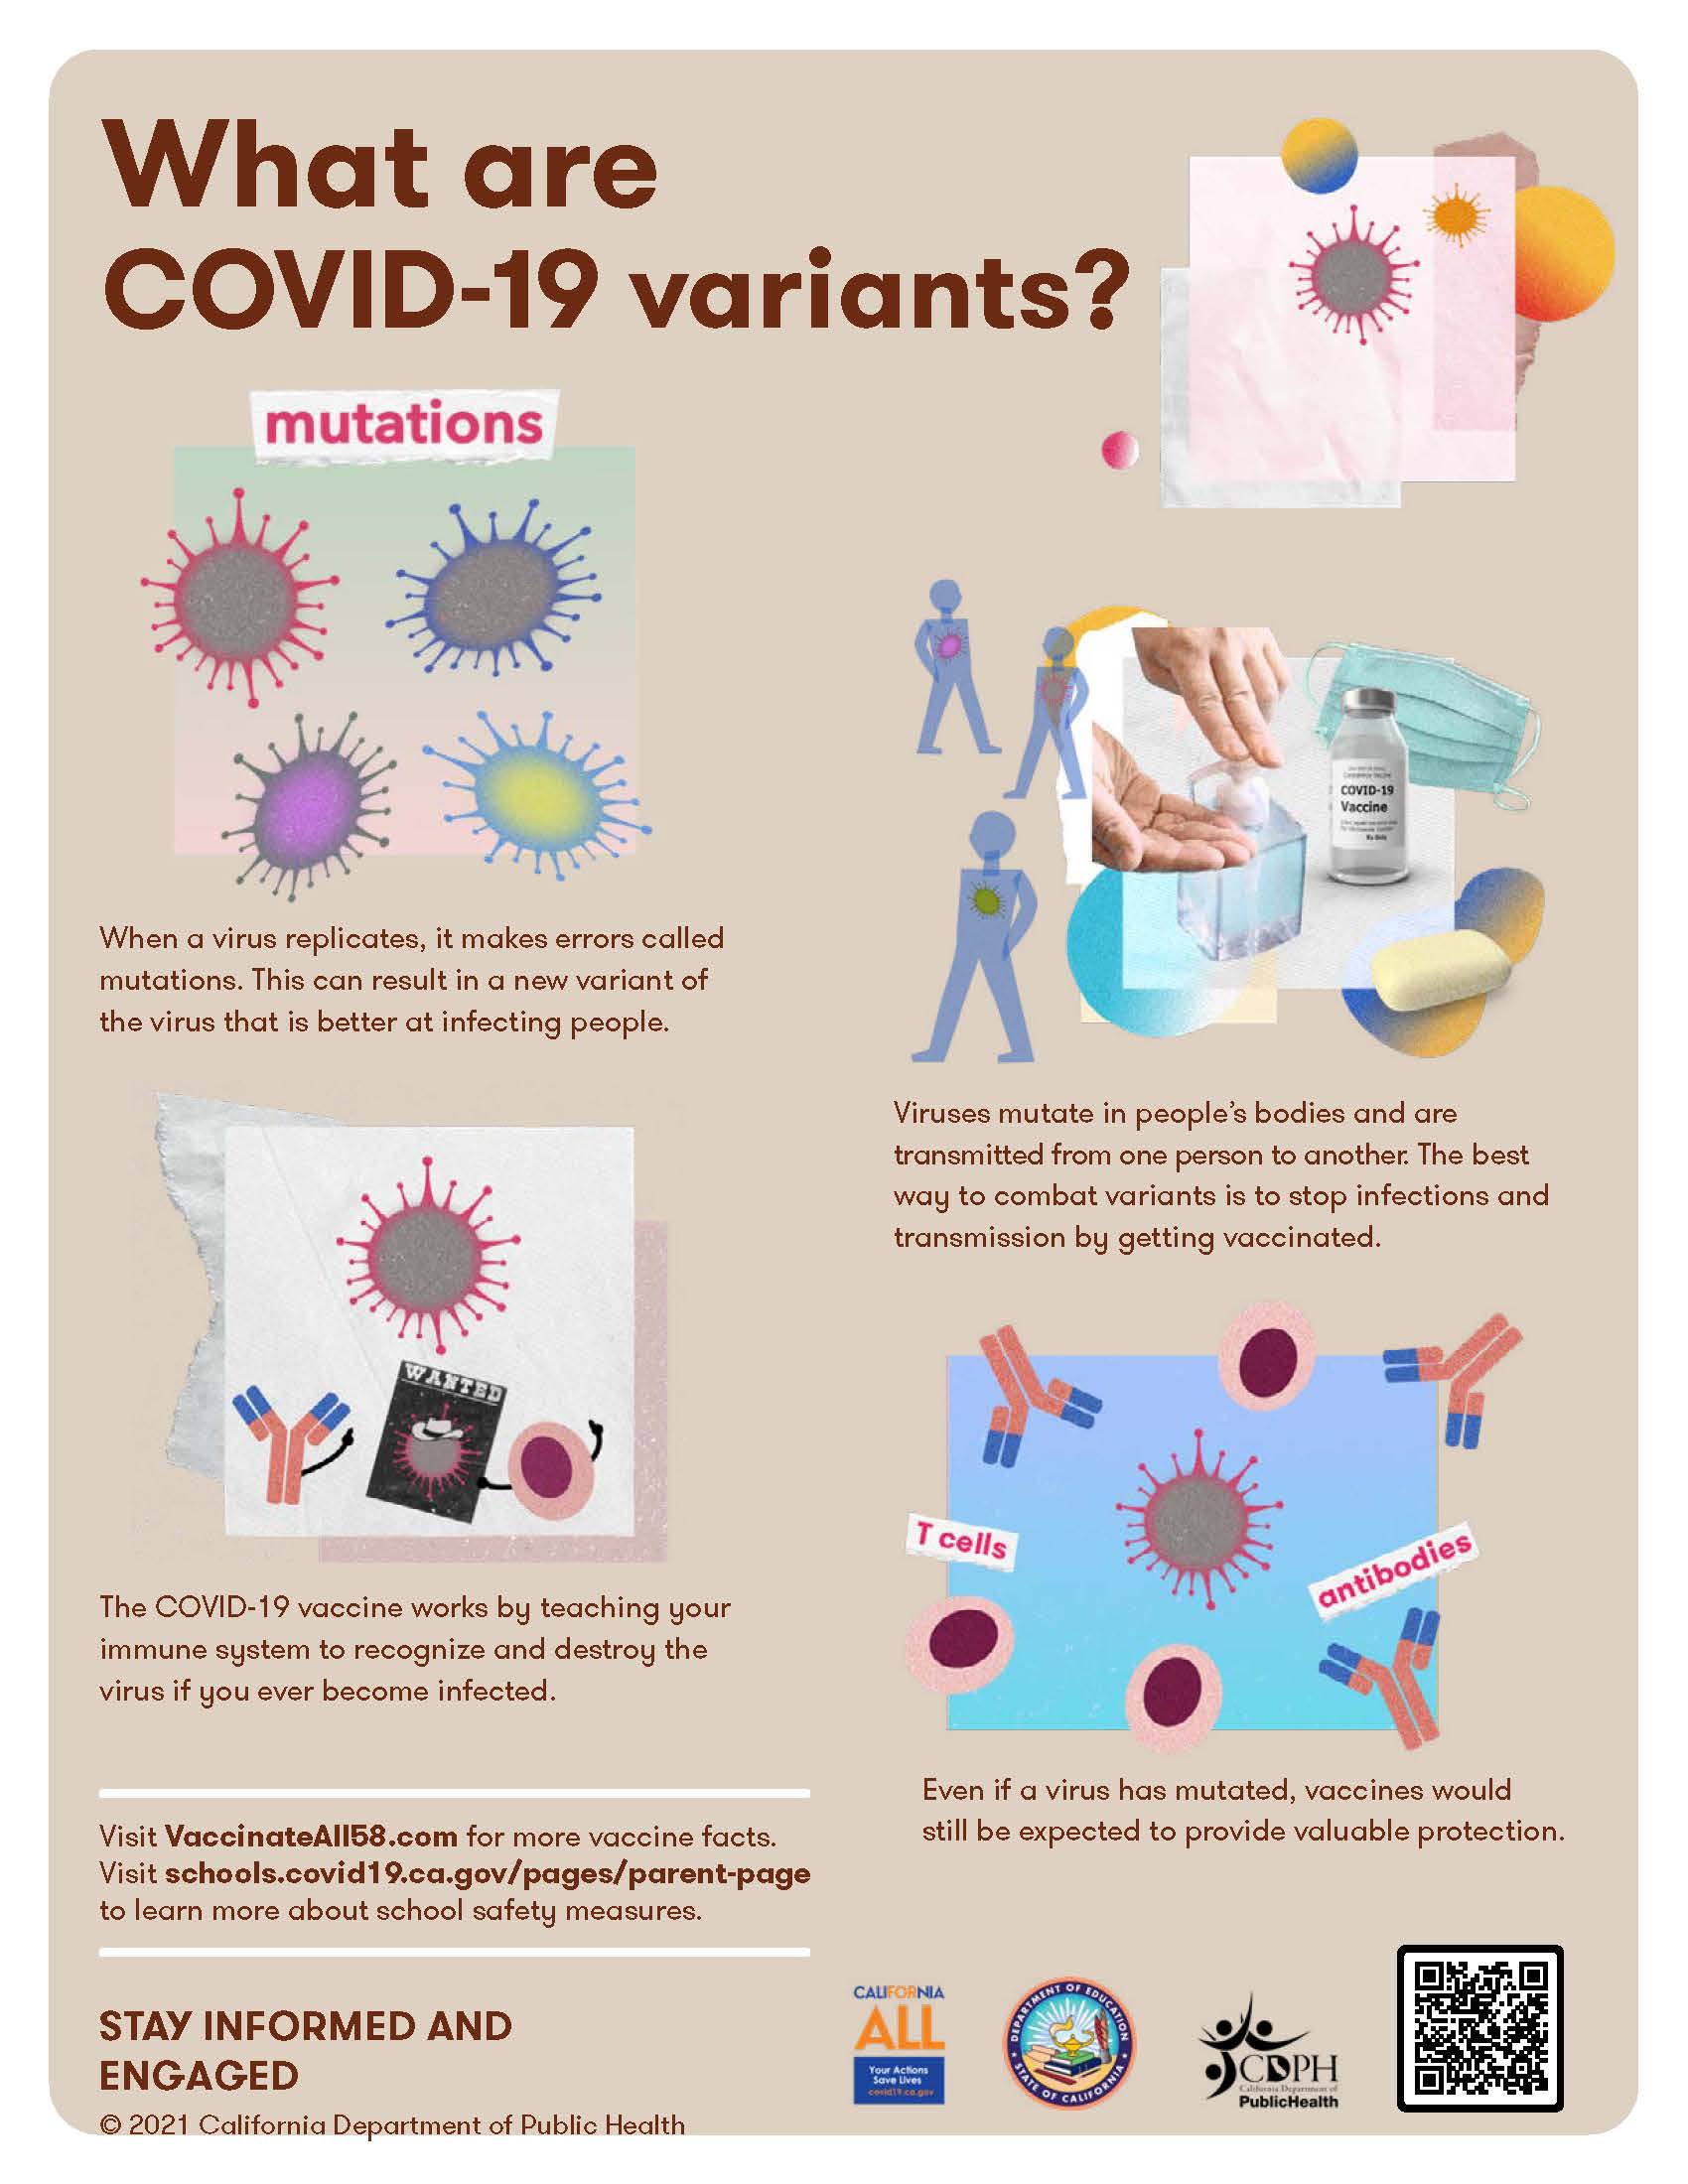 What are COVID-19 variants